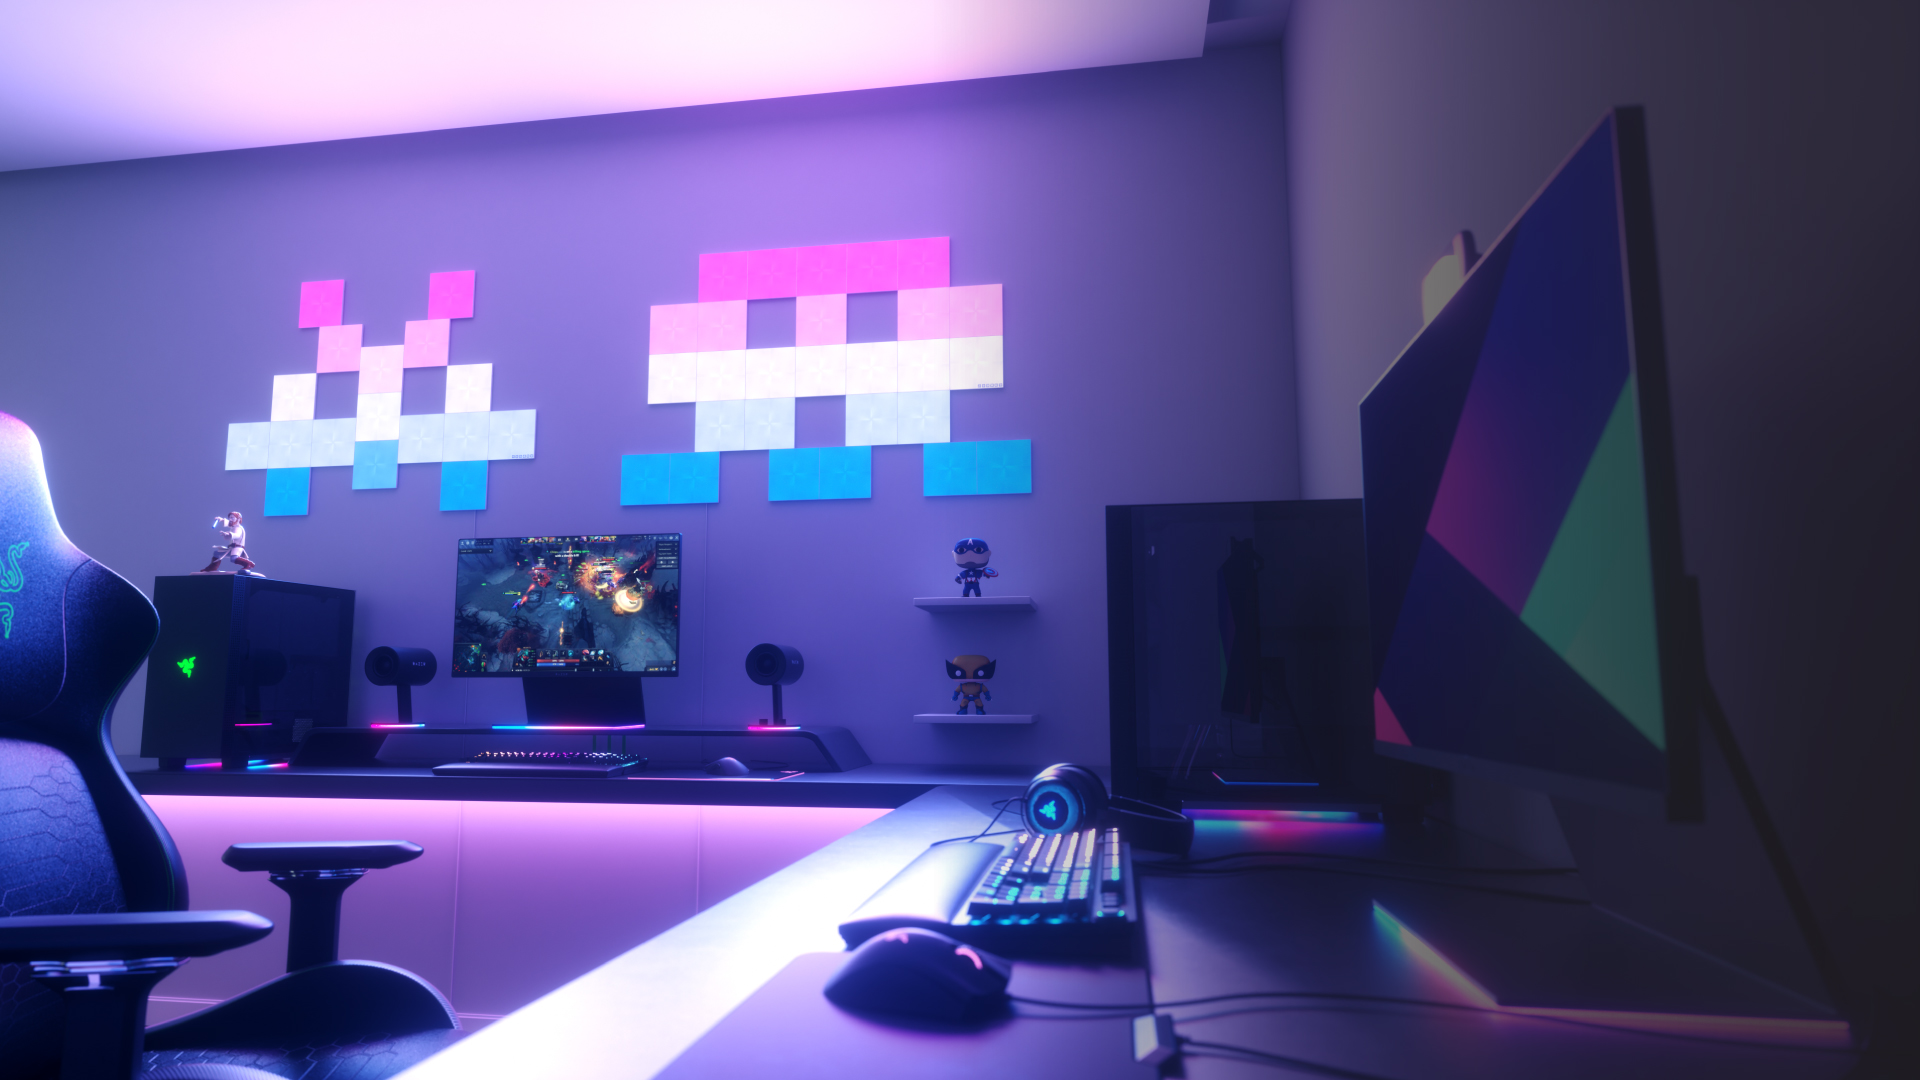 This is an image of Nanoleaf Canvas light squares on the wall above the desk and behind the monitor in a gaming battlestation. The RGB lights have over 16 million colors and are perfect for the gamer in your home. The modular smart light panels are connected together with linkers to create two space invaders design.